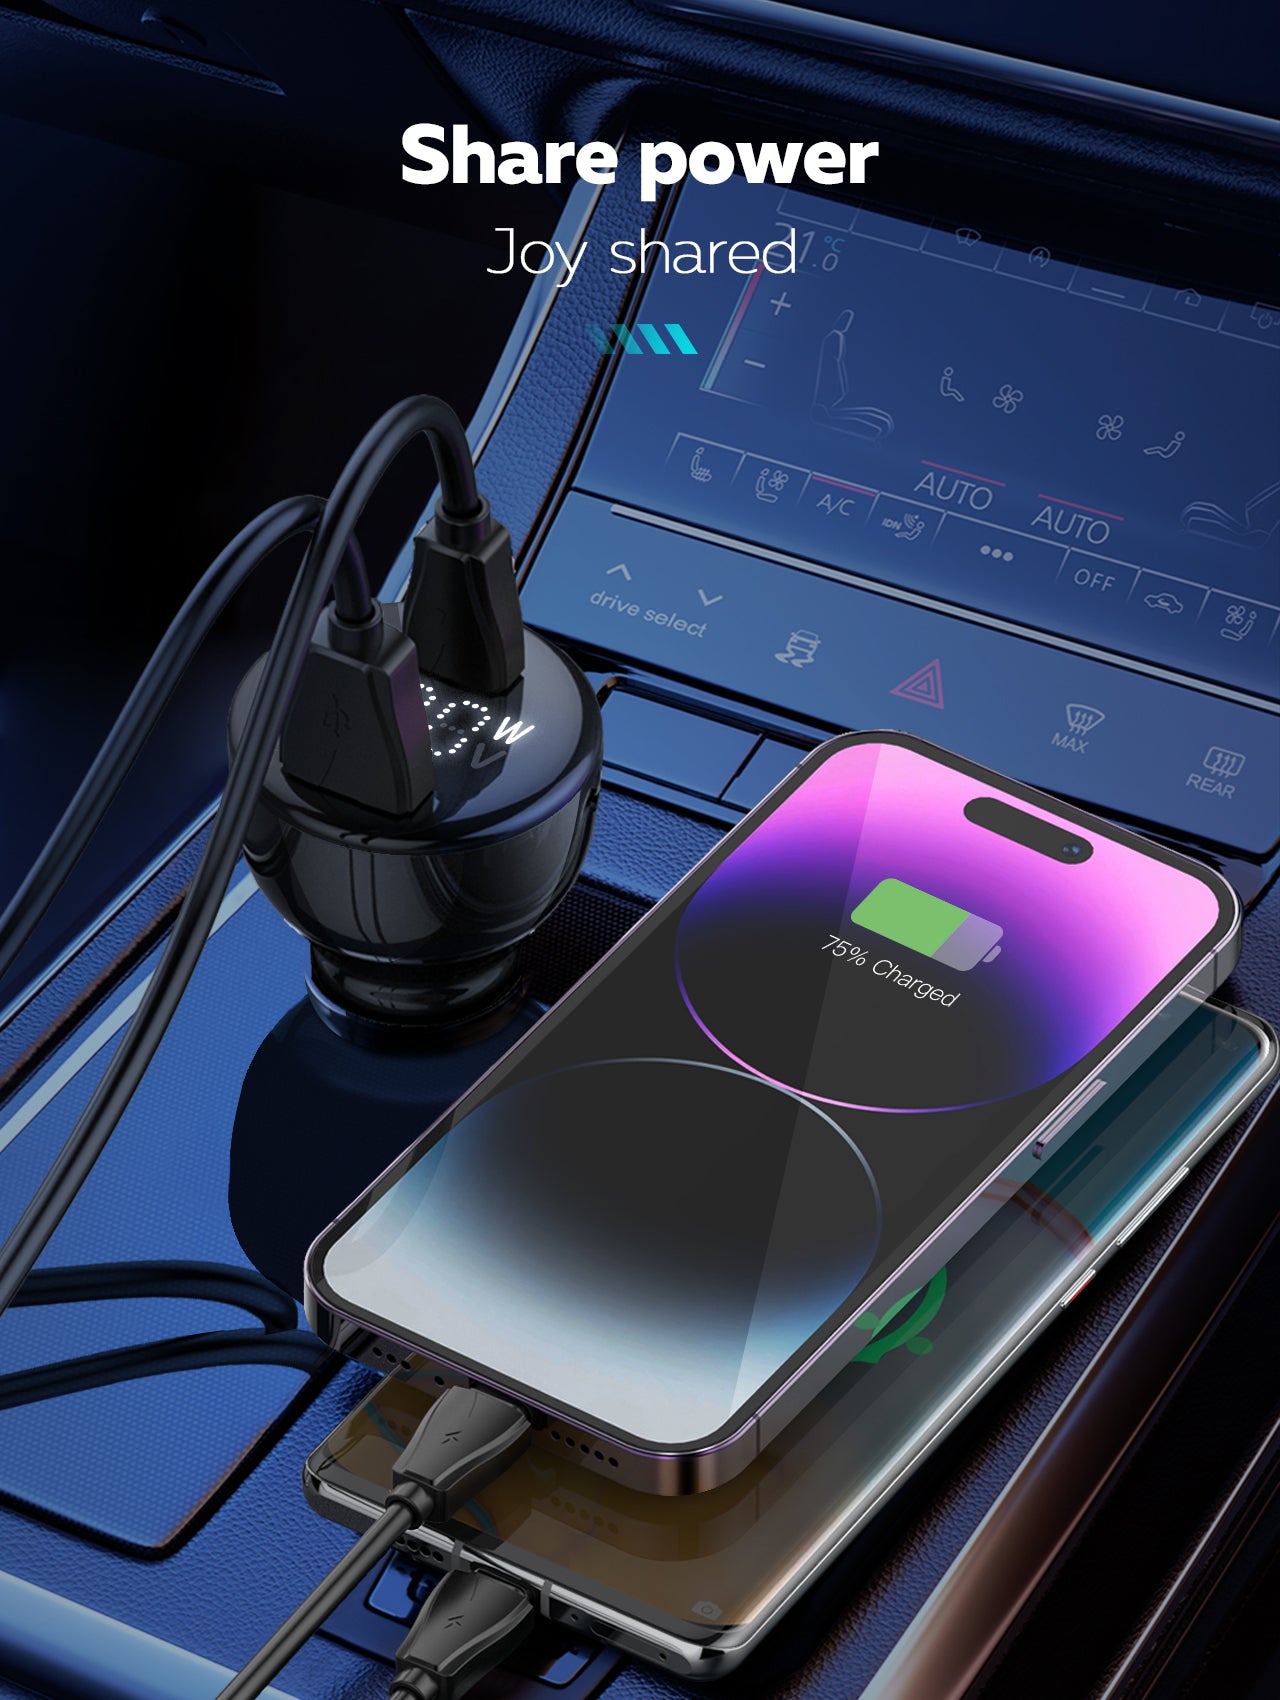 Glassology 100W Super Fast Car Charger with Type C & USB, Includes 100W USB C Cable - Ideal for Steam Deck, Macbook, Laptops, Tablets, iPhone, Samsung, Huawei, Xiaomi, and more.